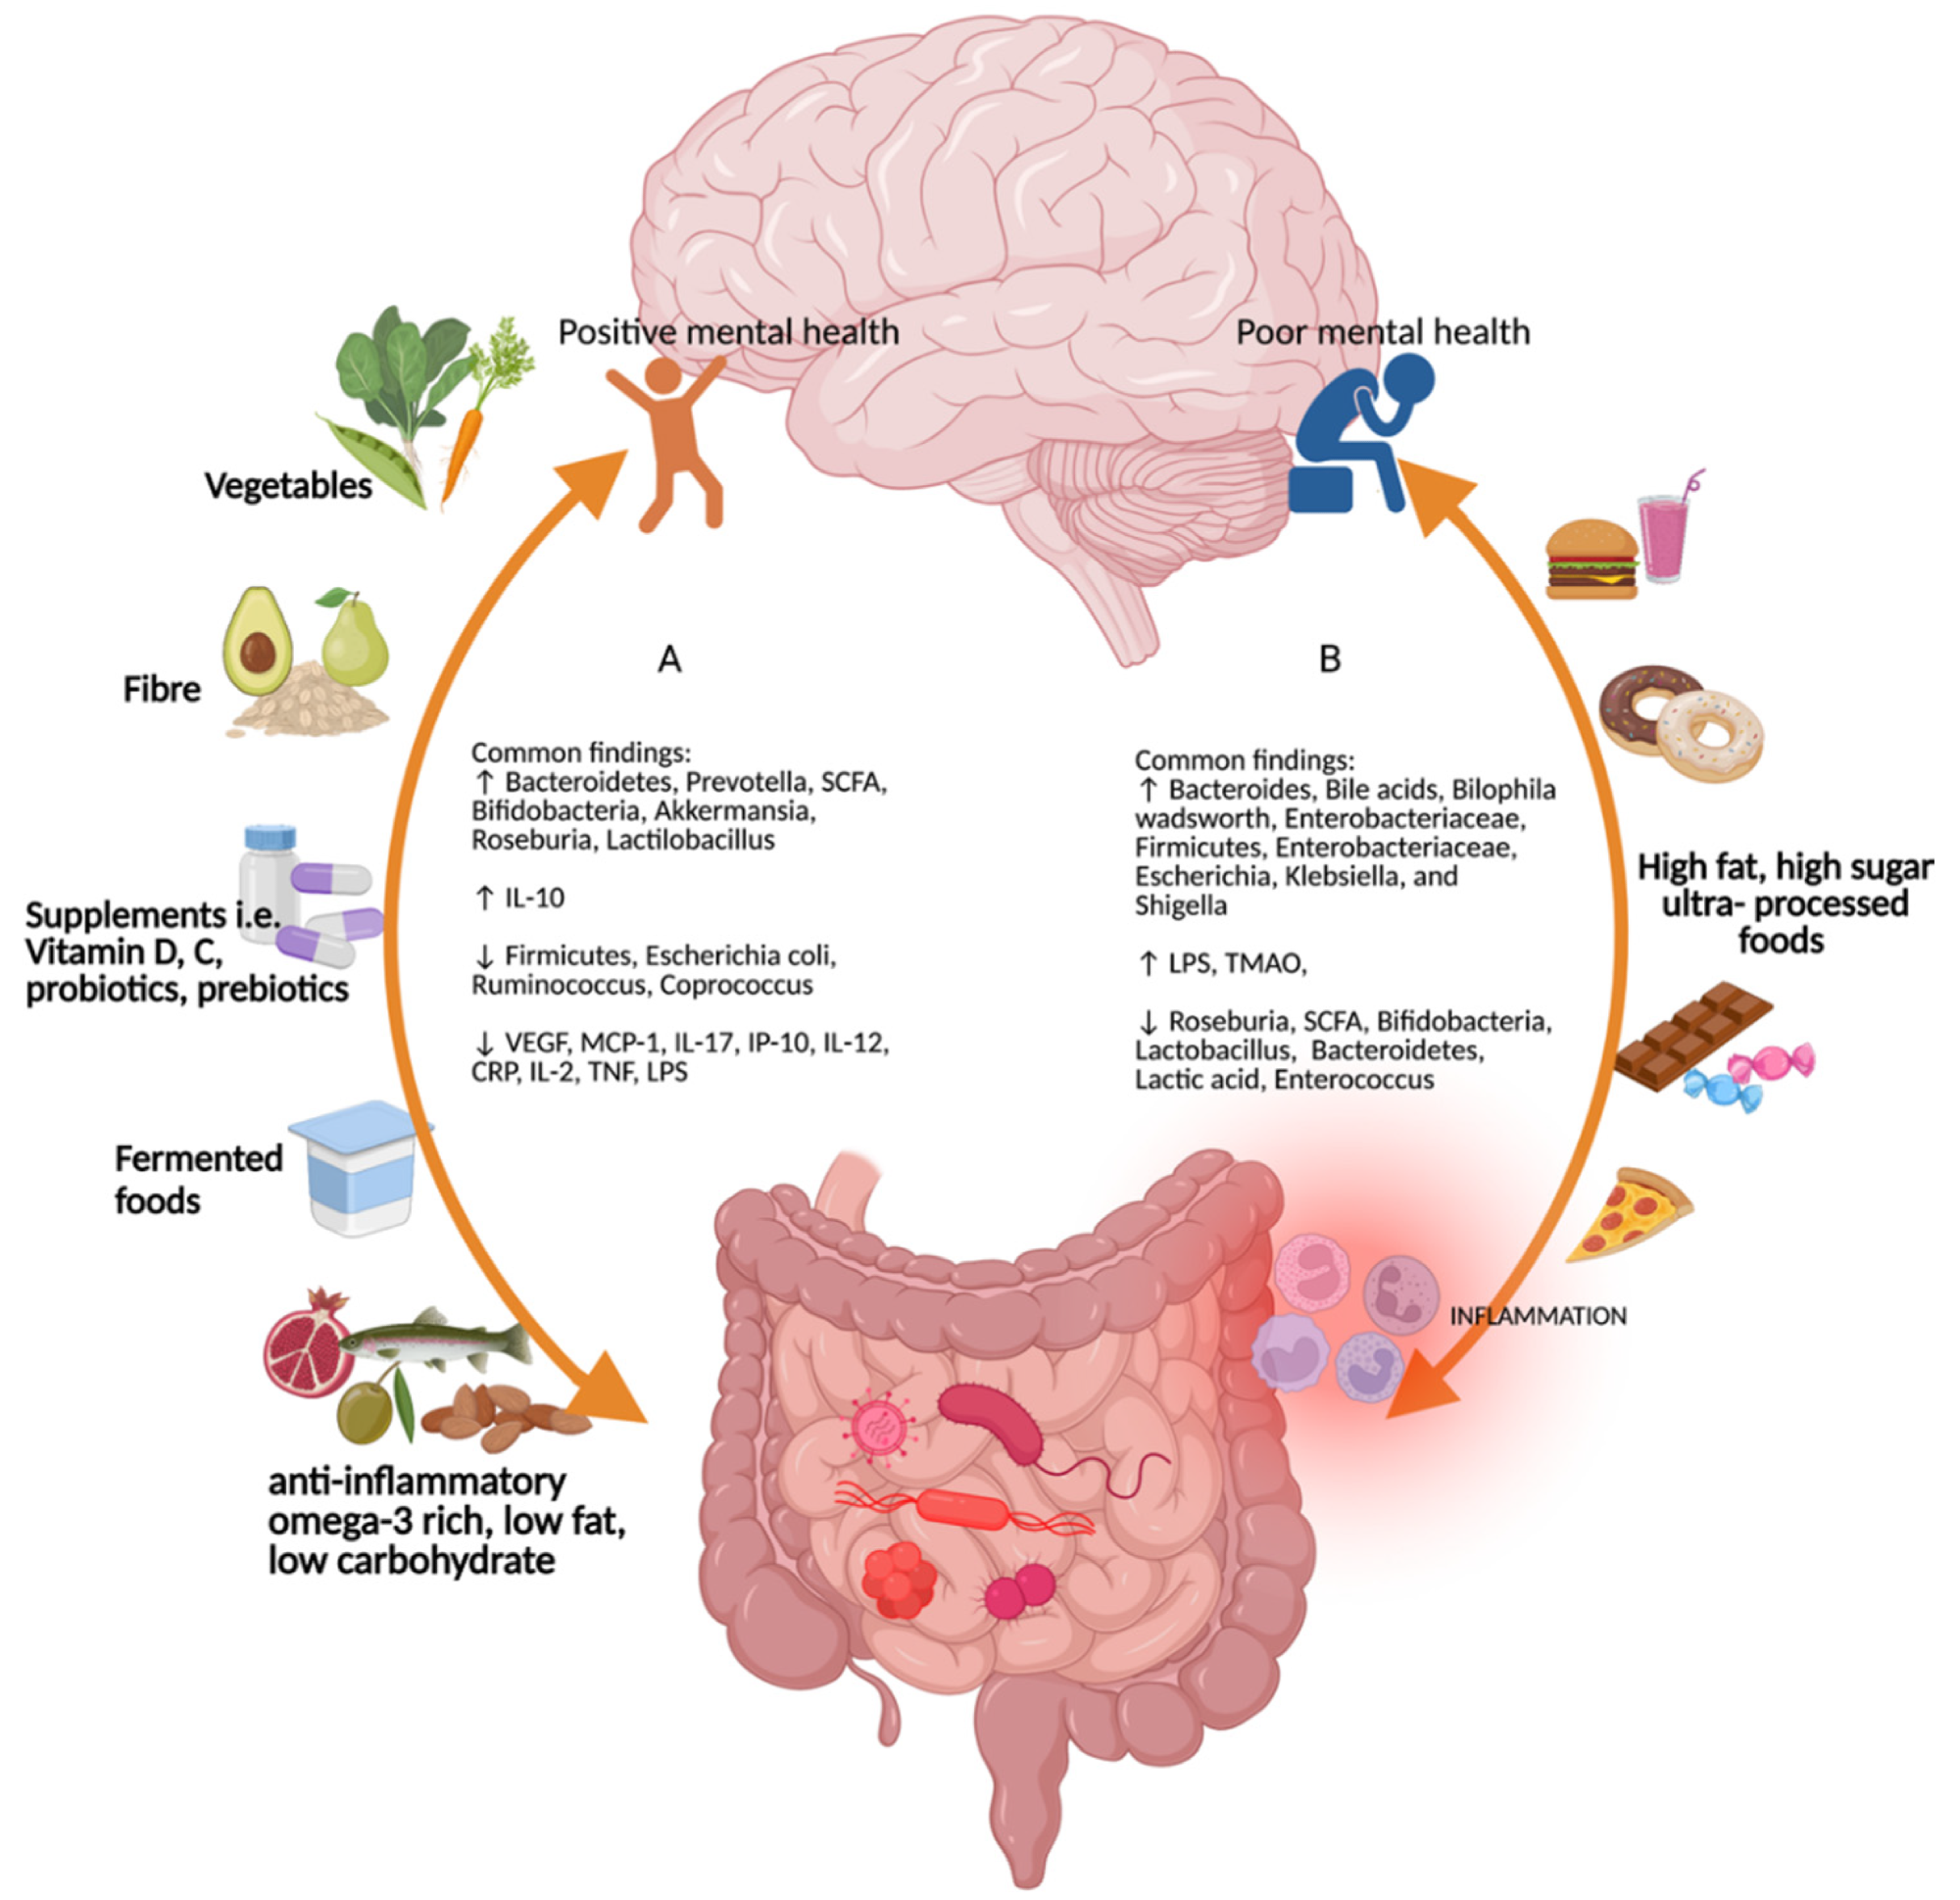 Common findings for the different types of diet on the gut–brain–microbiome axis. (A) Diets rich in vegetables, fiber, micronutrients such as vitamins D and C, probiotics and prebiotics, fermented foods, anti-inflammatory omega-3-rich, low-fat, and low-carbohydrate foods promote positive mental health and increases in Bacteroidetes, Prevotella, short-chain fatty acids, Bifodobacteria, Akkermansia, Roseburia, Lactilobacillus, and interleukin (IL)-10, and decreases in Firmicutes, Escherichia coli, Ruminococcus, Coprococcus, vascular endothelial growth factor, monocyte chemoattractant protein-1, interferon gamma-induced protein 10, IL-17, IL-12, c-reactive protein, IL-2, tumor necrosis factor, and lipopolysaccharide. (B) High-fat, high-sugar, and ultra-processed foods increase Bacteroides, bile acids, Bilophila wadsworth, Enterobacteriaceae, Firmicutes, Enterobacteriaceae, Escherichia, Klebsiella, and Shigella. Figure created with Biorender (accessed on 29 April 2022).